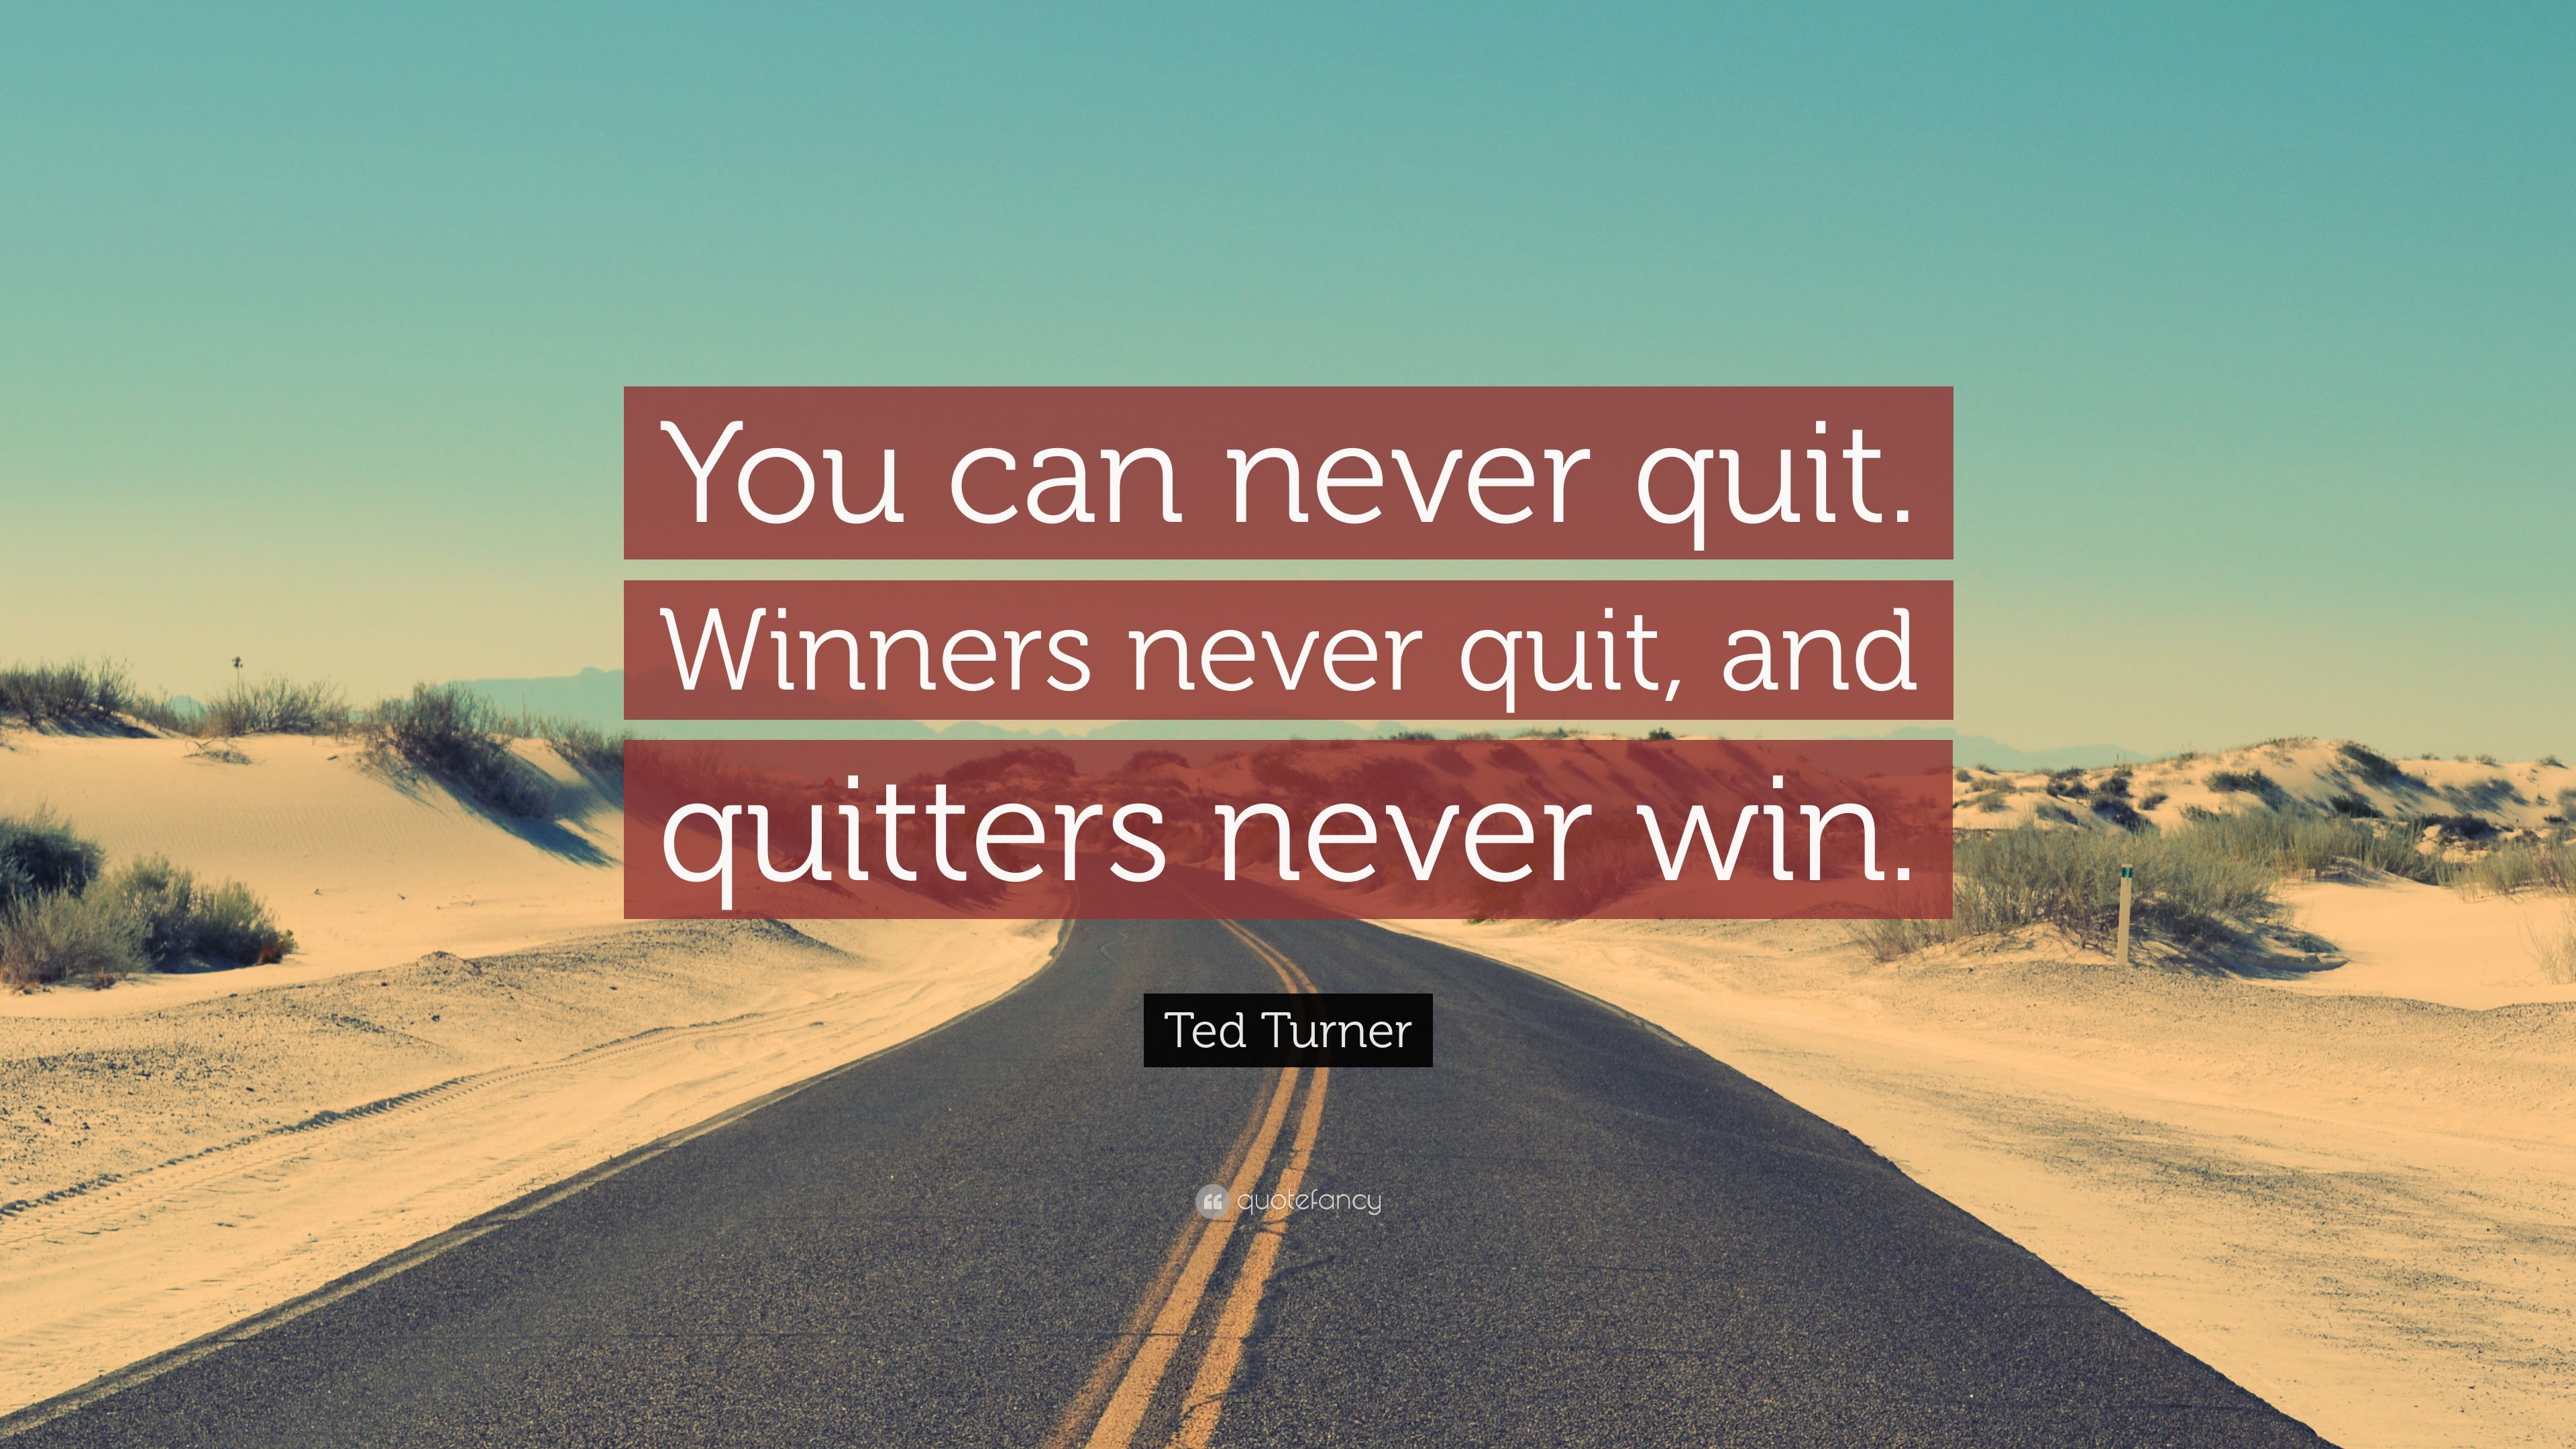 Ted Turner Quote: “You can never quit. Winners never quit, and quitters never win.” (10 wallpaper)